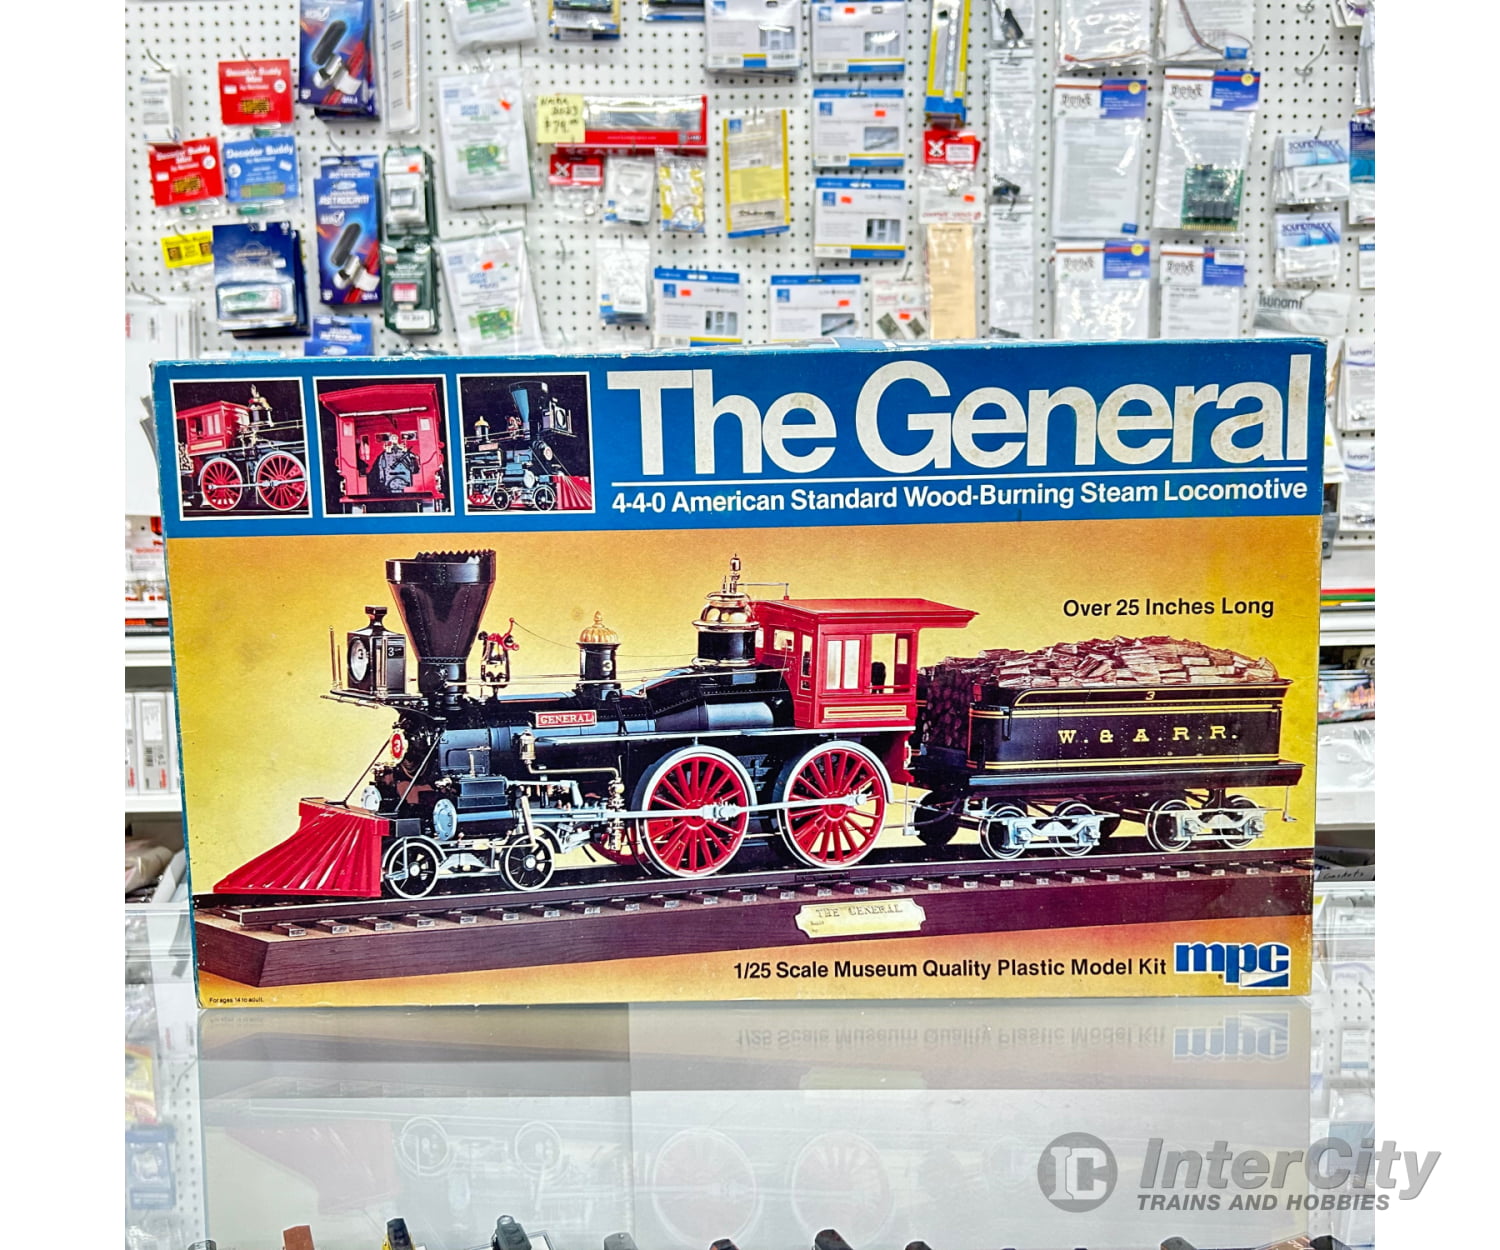 Mpc 1/25 Scale 4-4-0 The General Steam Locomotive Collectibles